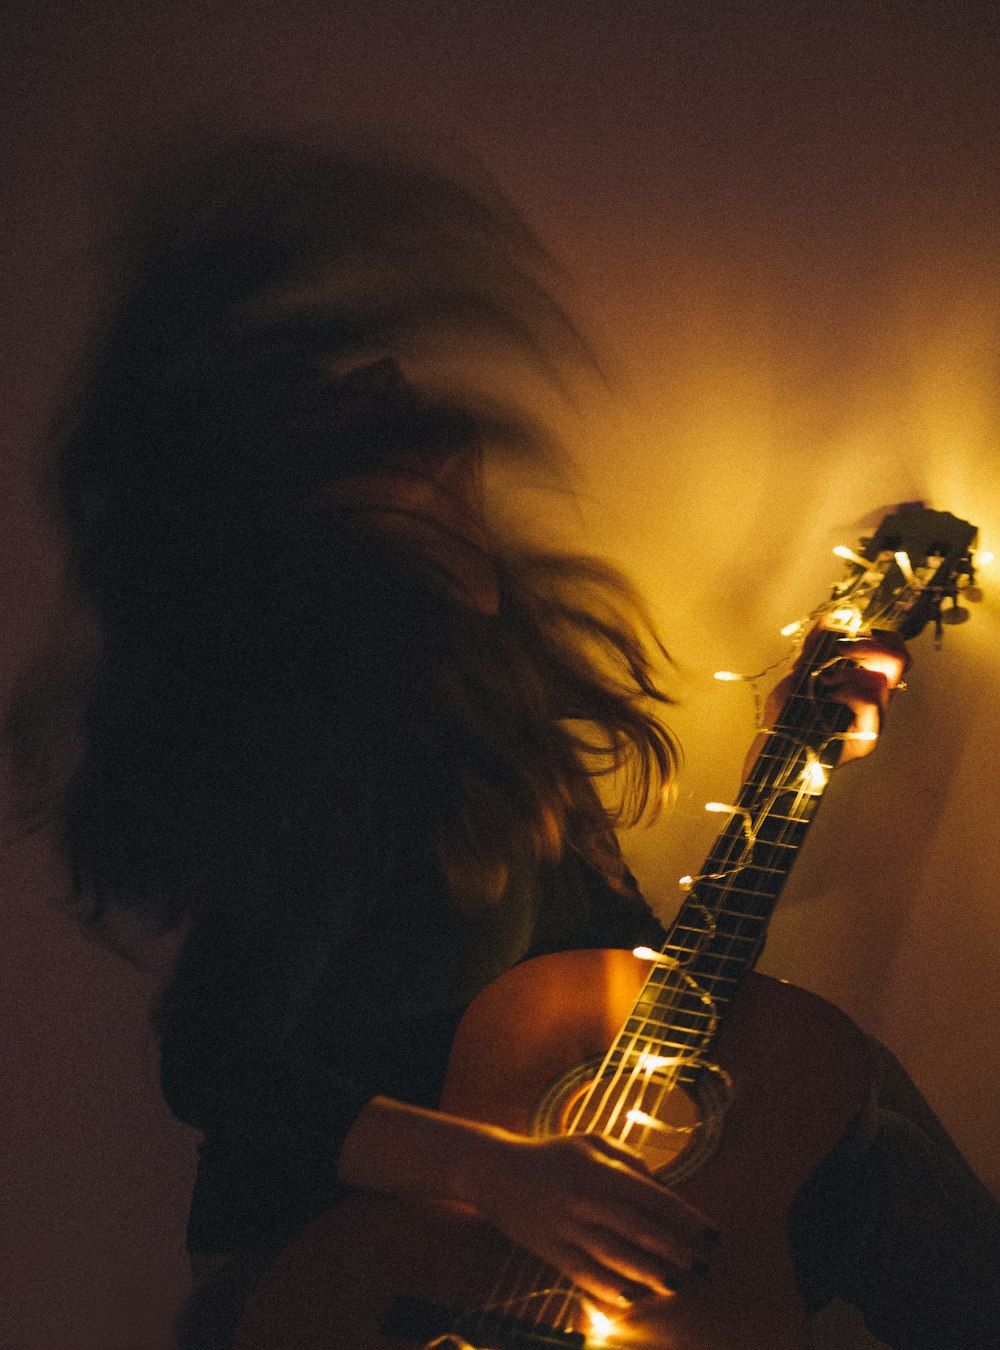 350+ Girl With Guitar Pictures [HQ] | Download Free Images & Stock Photos  on Unsplash